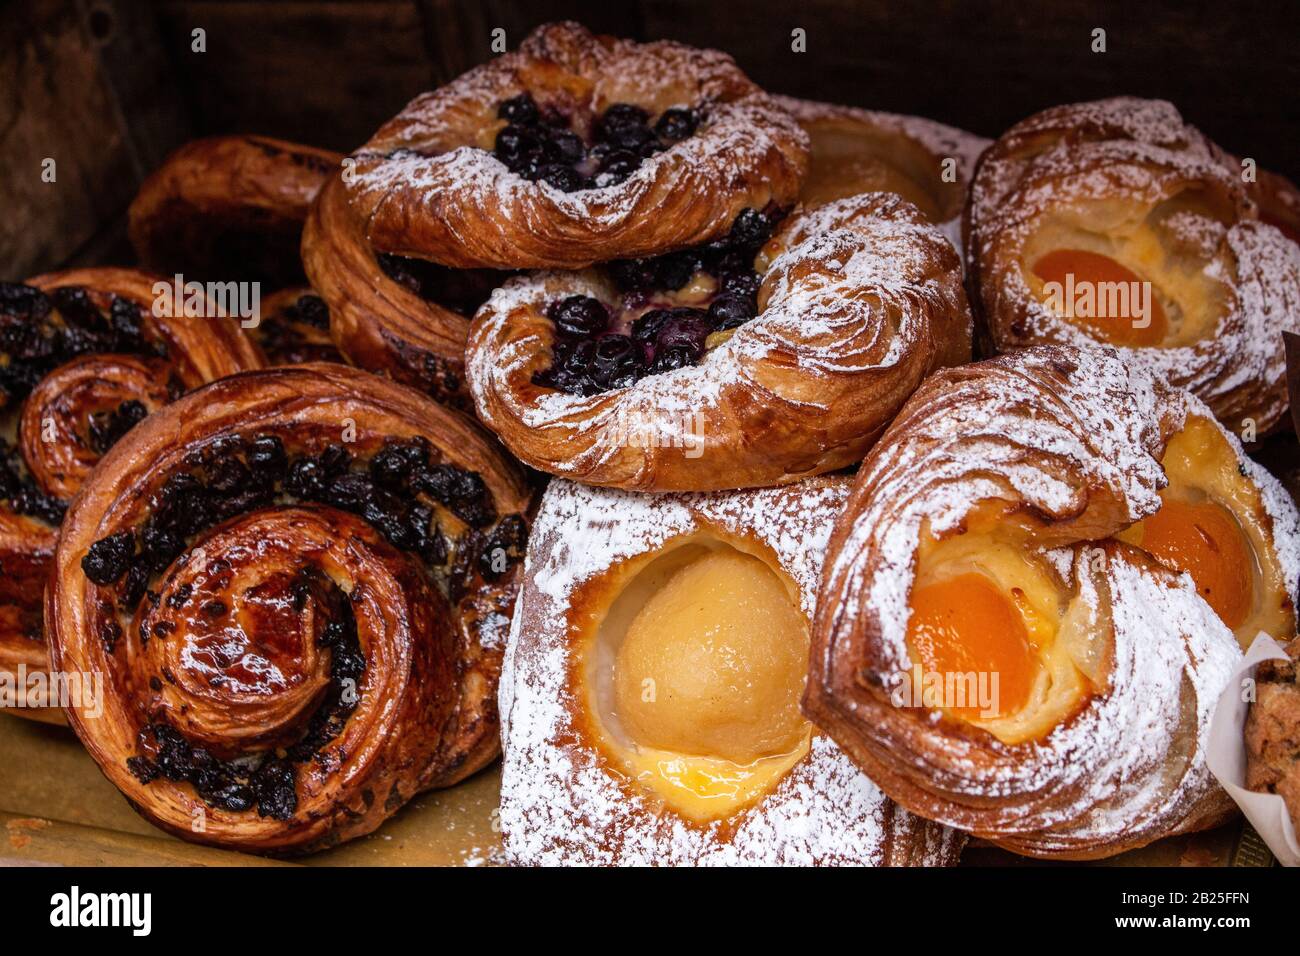 Freshly baked danish pastries, custard, apricots, blueberries, raisins, cinnamon swirl dusted in icing sugar and glaze Stock Photo